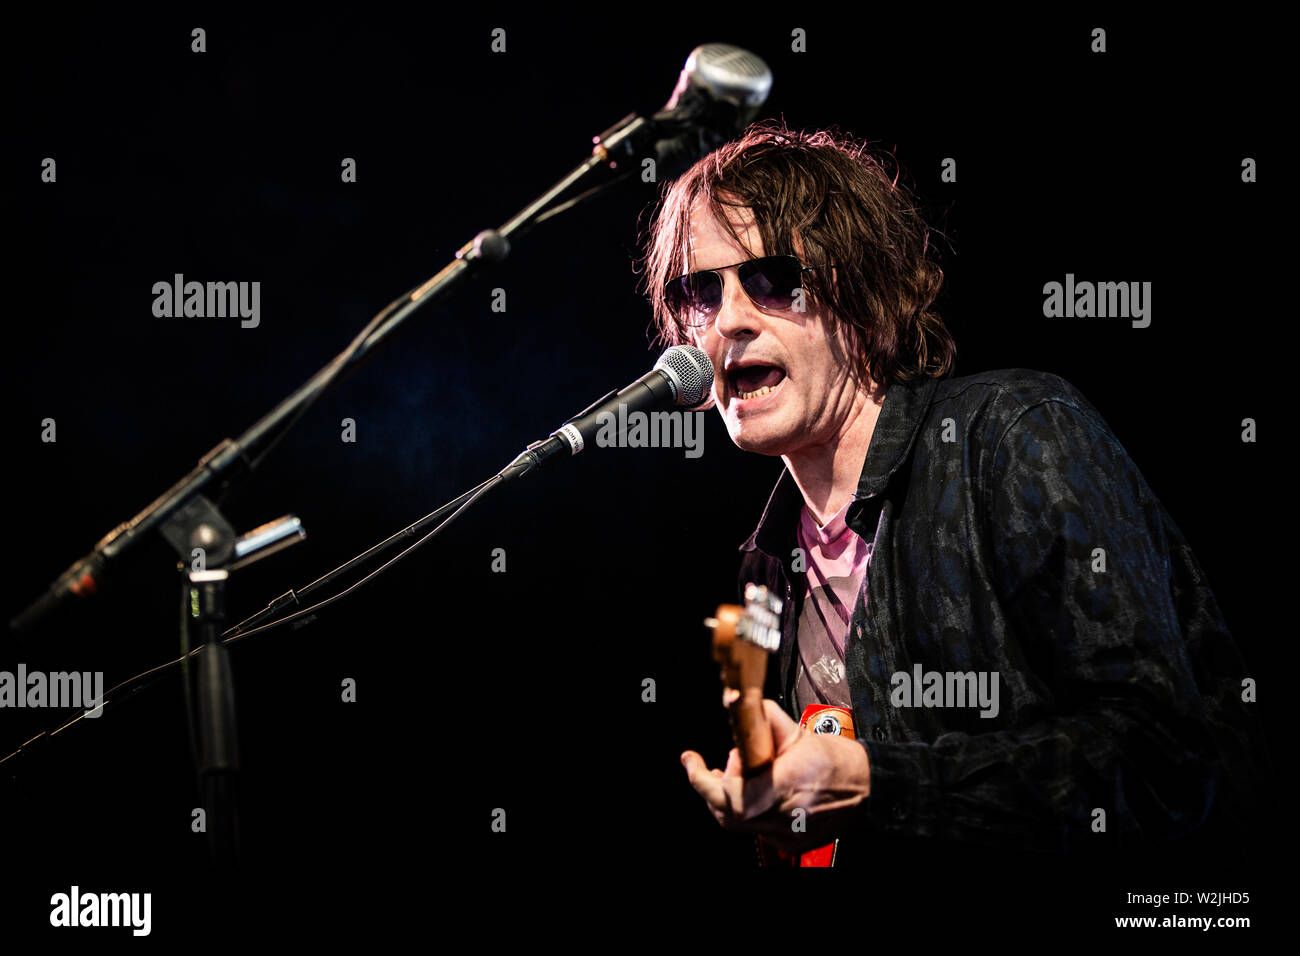 Roskilde, Denmark. July 05th, 2019. The English space rock band Spiritualized performs a live concert during the Danish music festival Roskilde Festival 2019. Here singer and musician Jason Pierce is seen live on stage. (Photo credit: Gonzales Photo - Christian Hjorth). Stock Photo